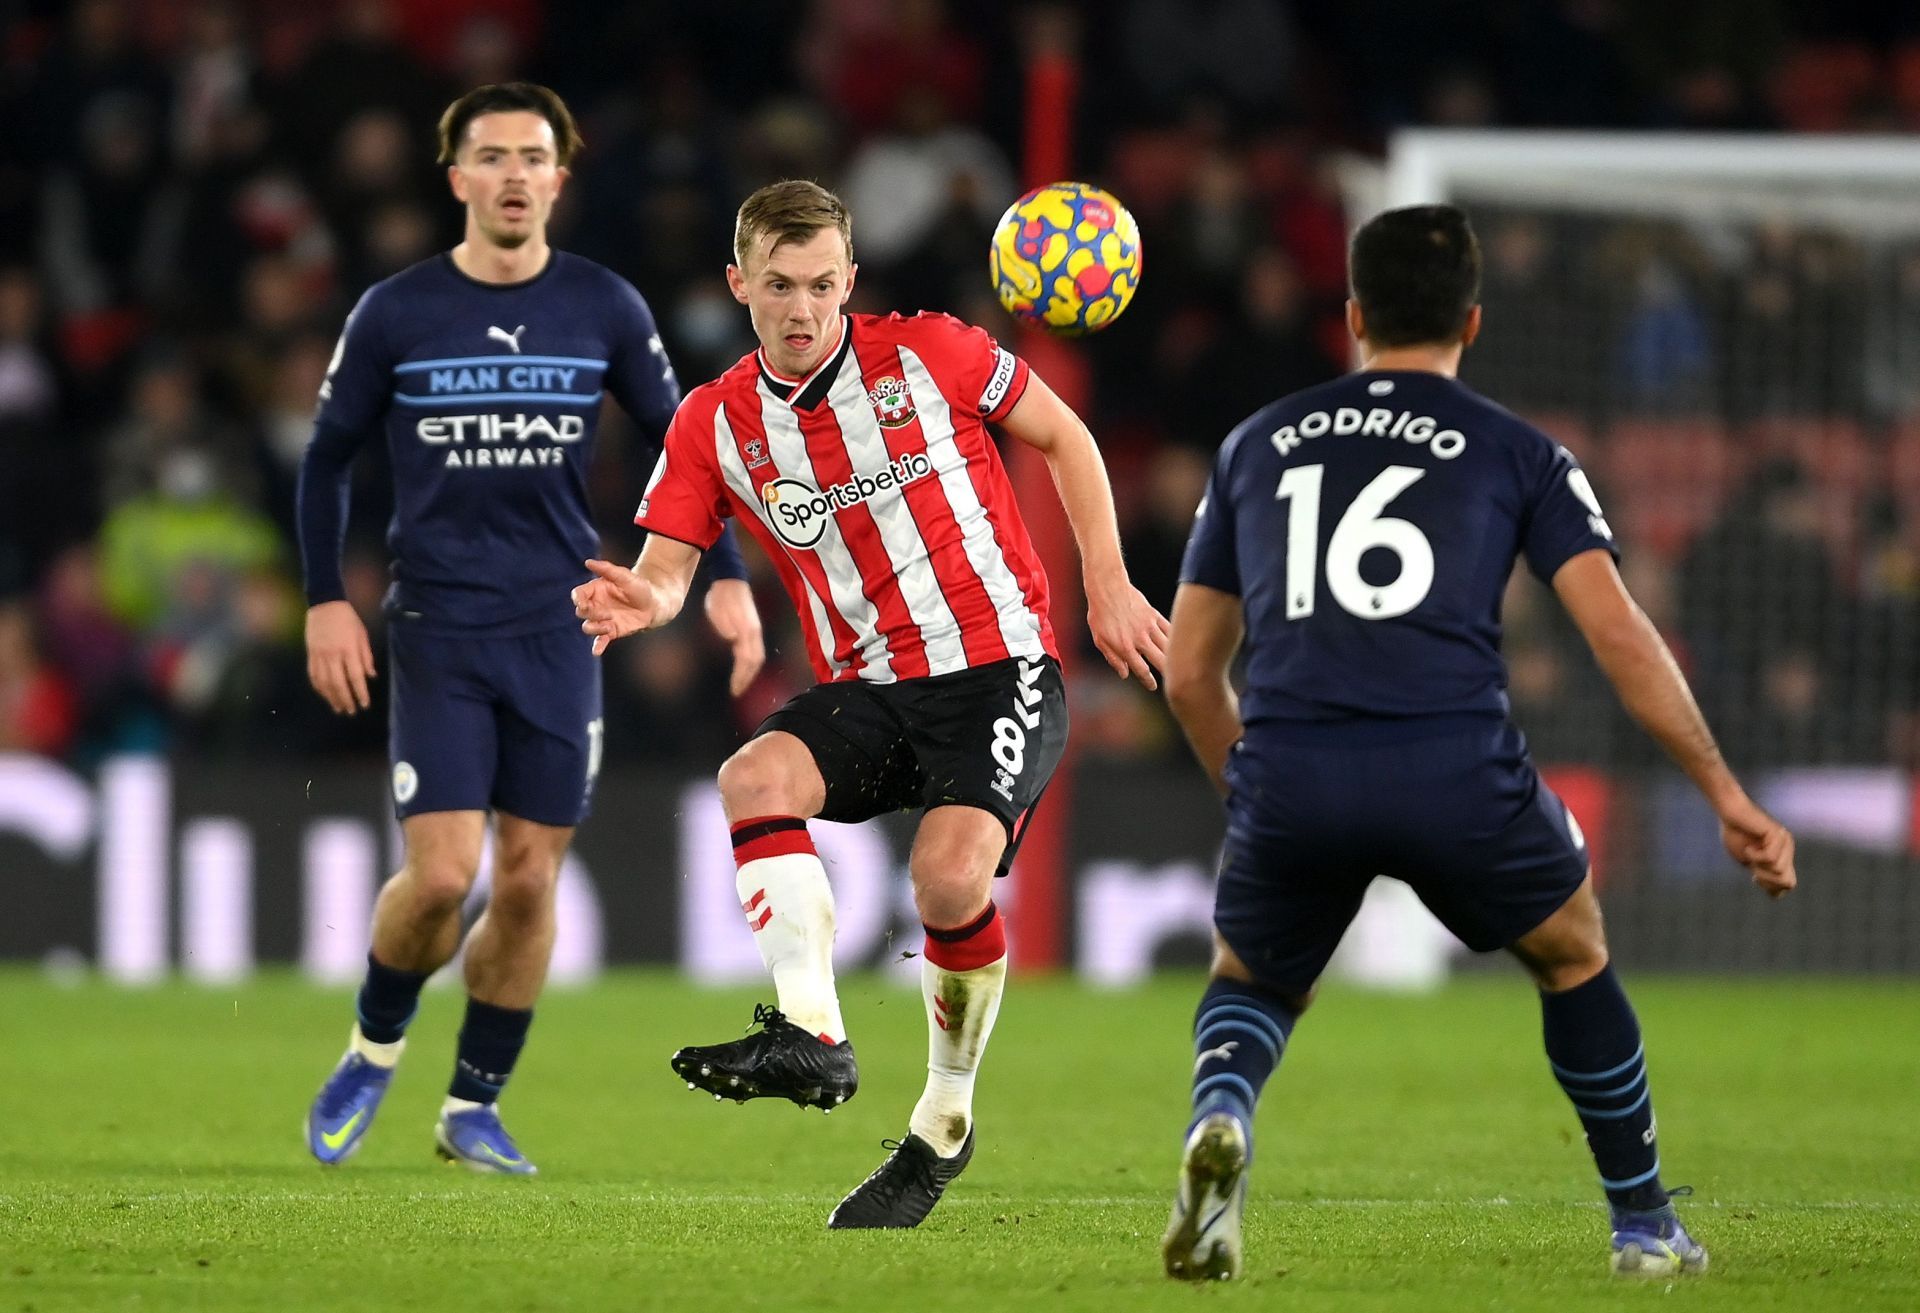 James Ward-Prowse and Oriol Romeu were key in Southampton progressing the ball upfield on Saturday.